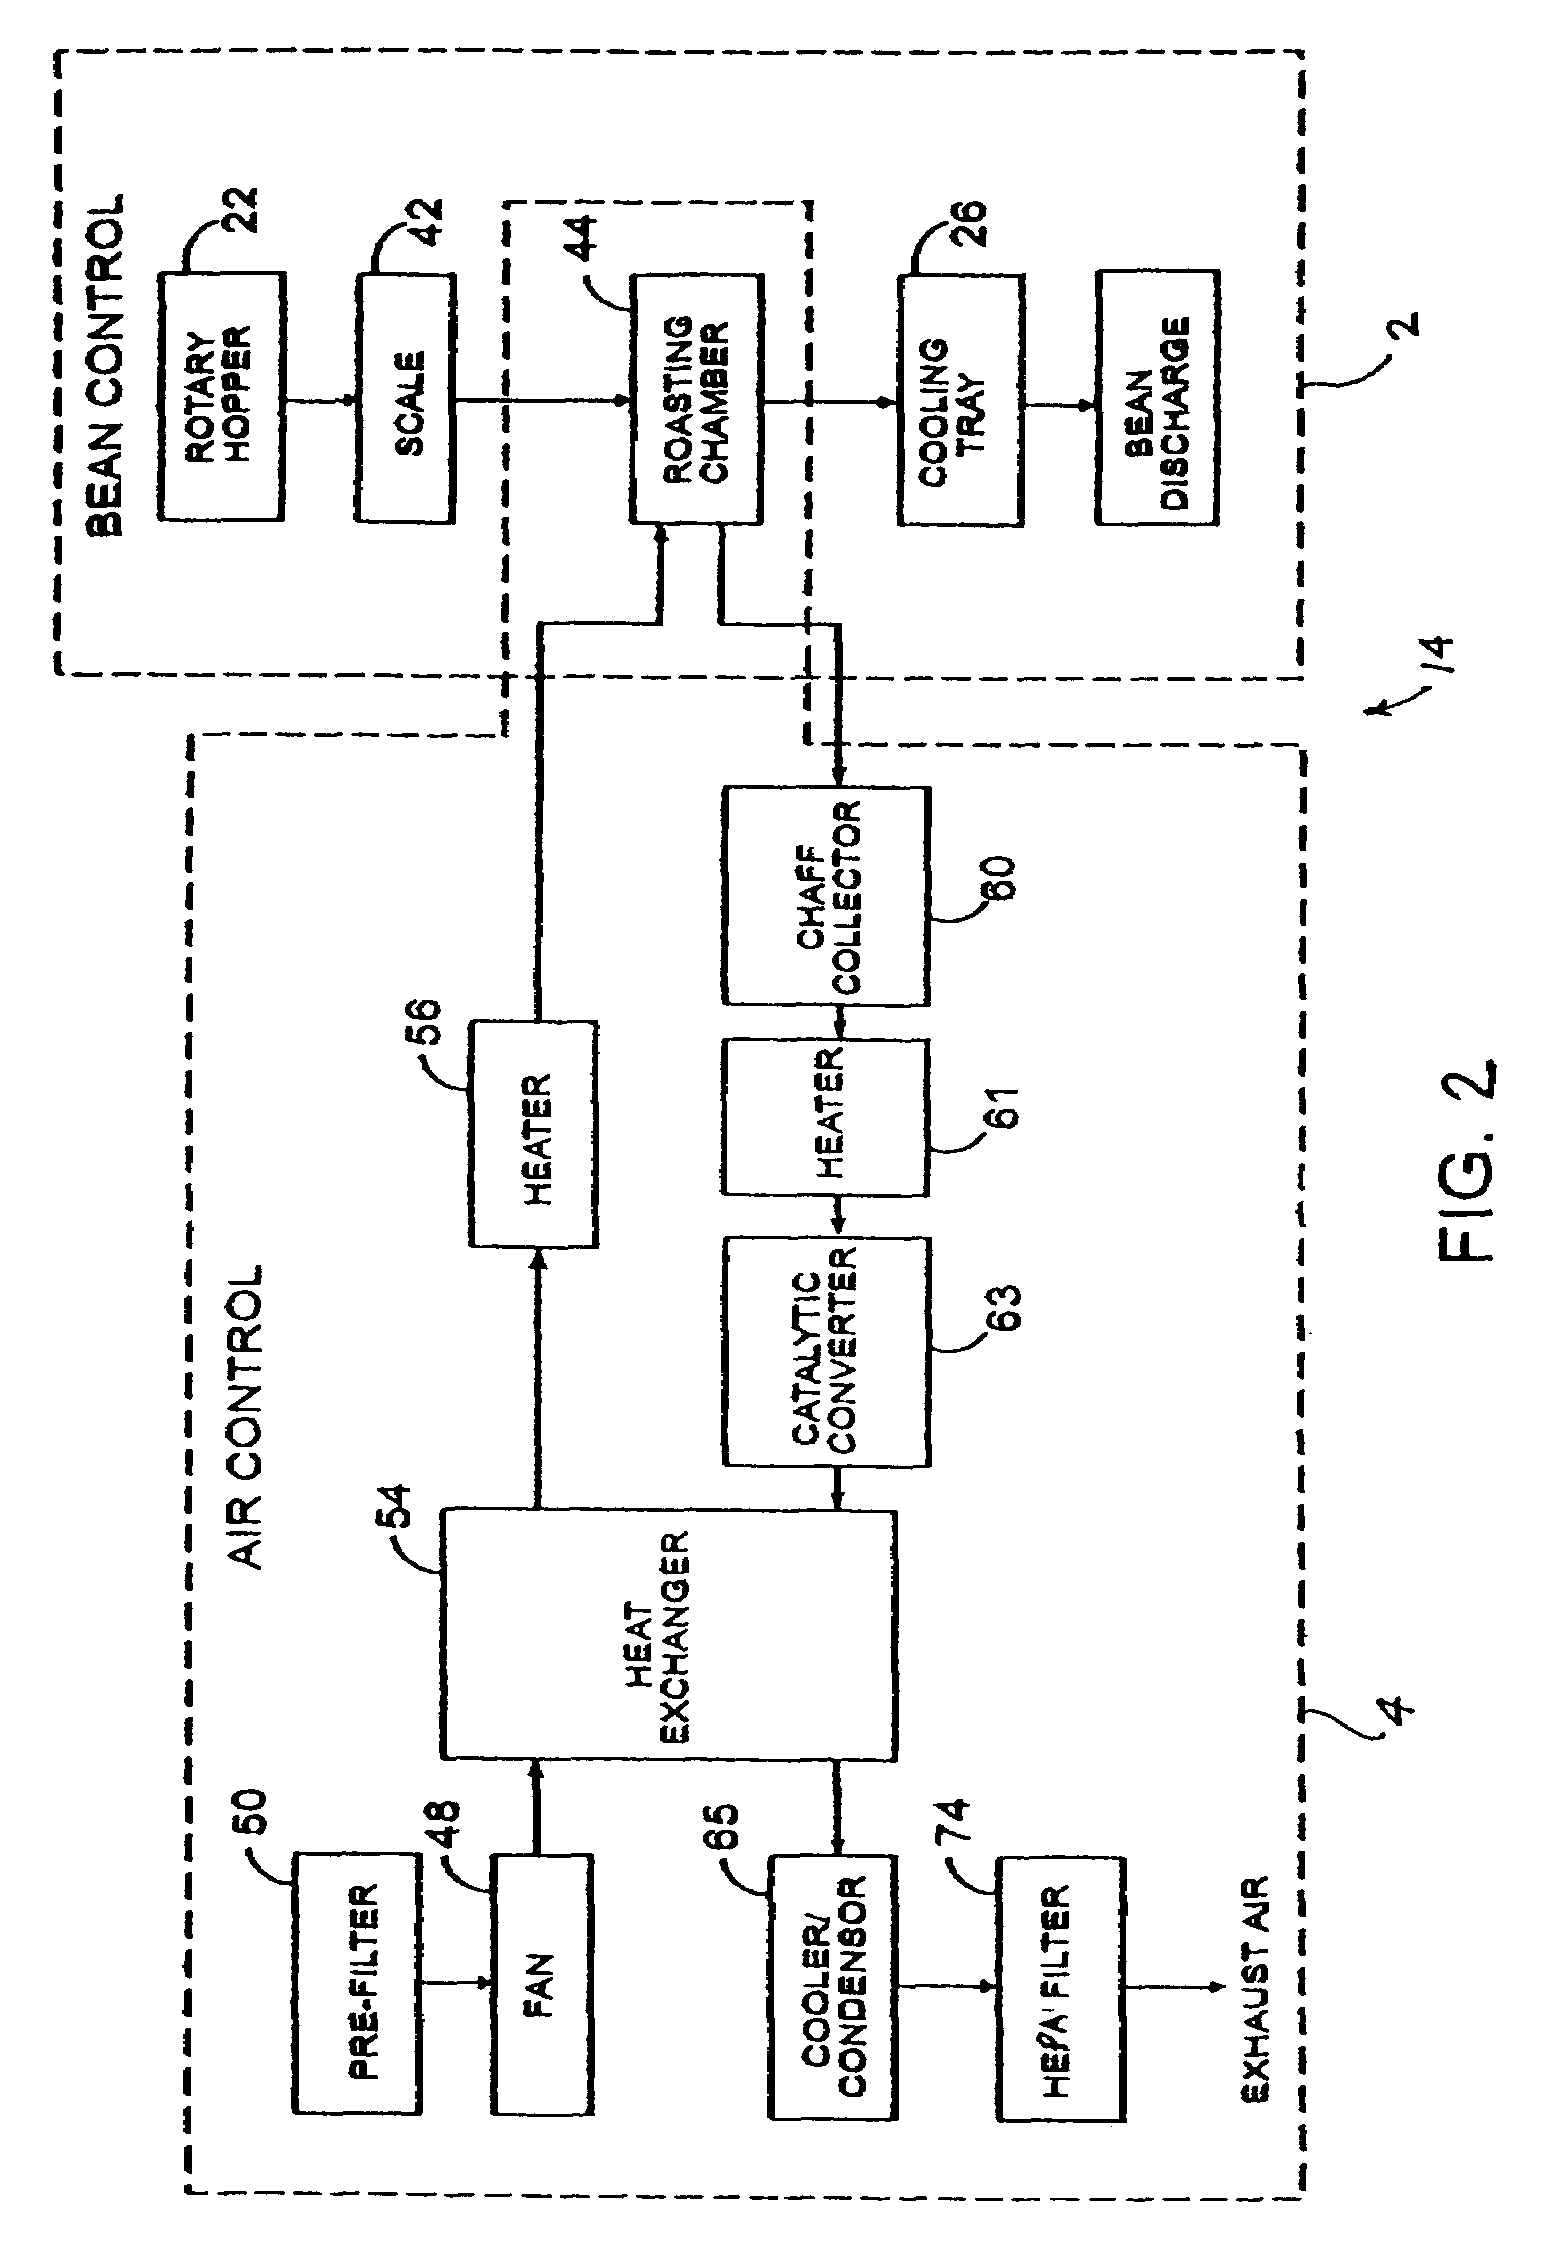 Method and apparatus for preventing the discharge of powdery caffeine during coffee roasting